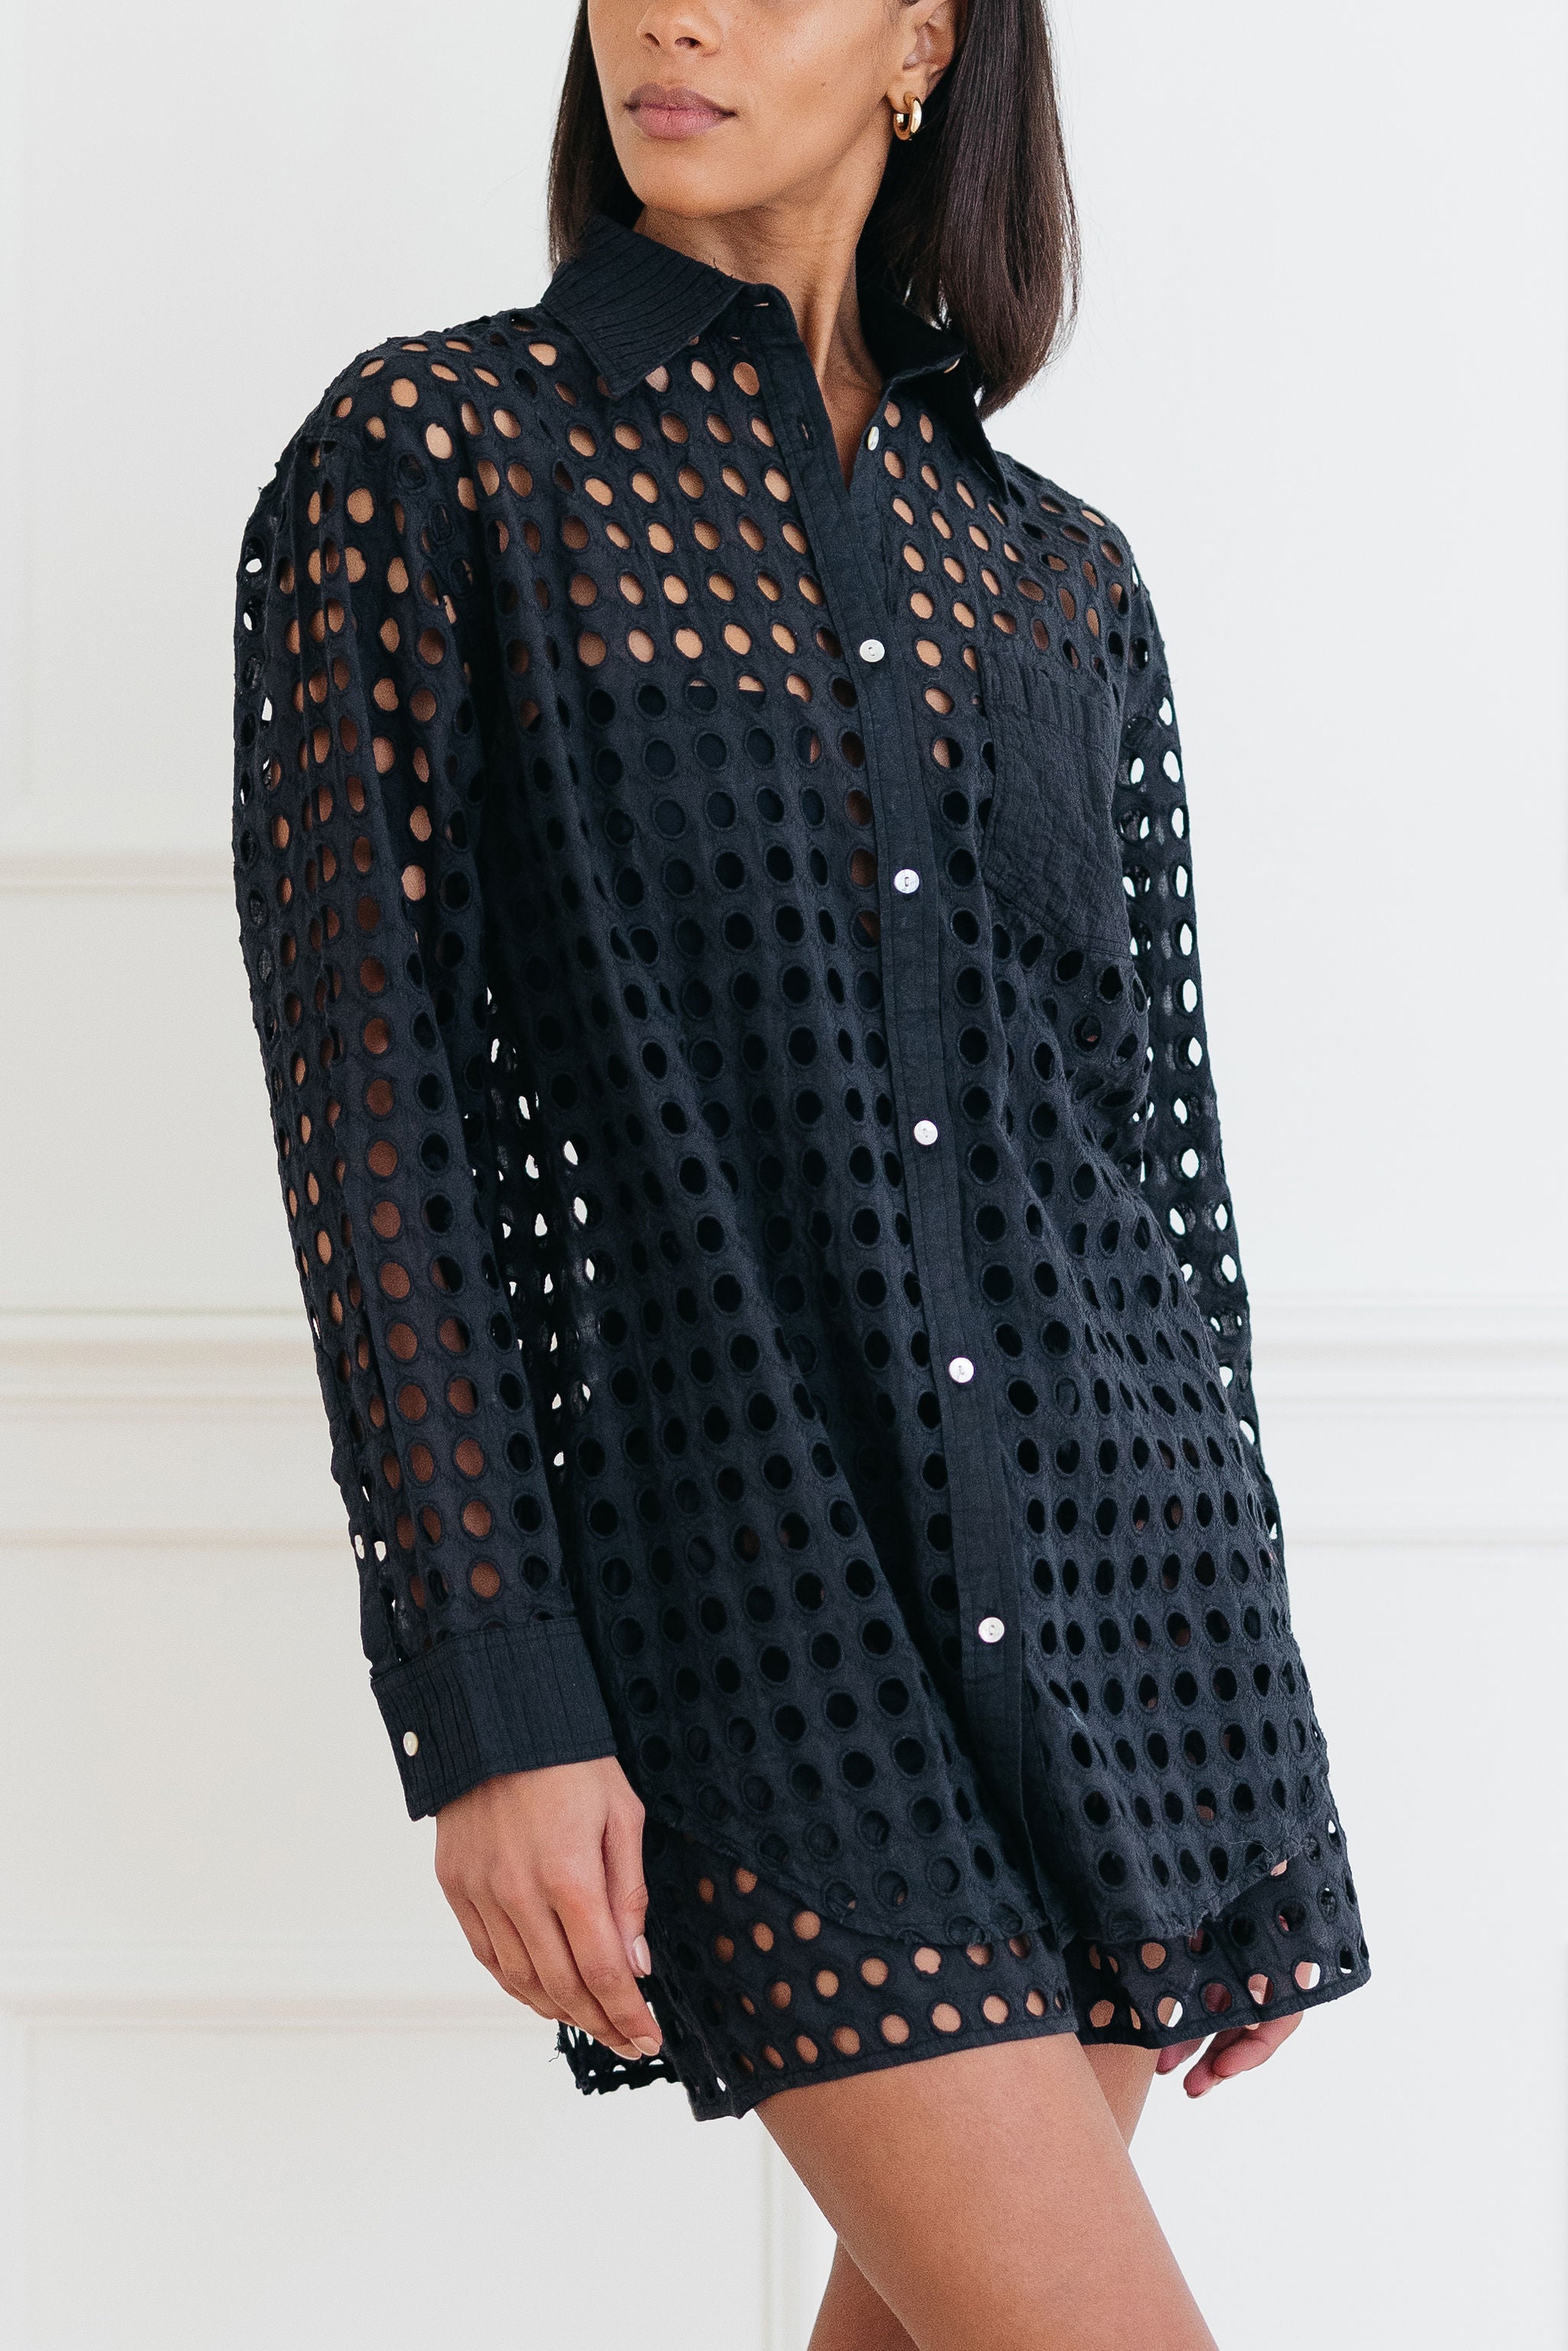 The Blackout Oxford Tunic